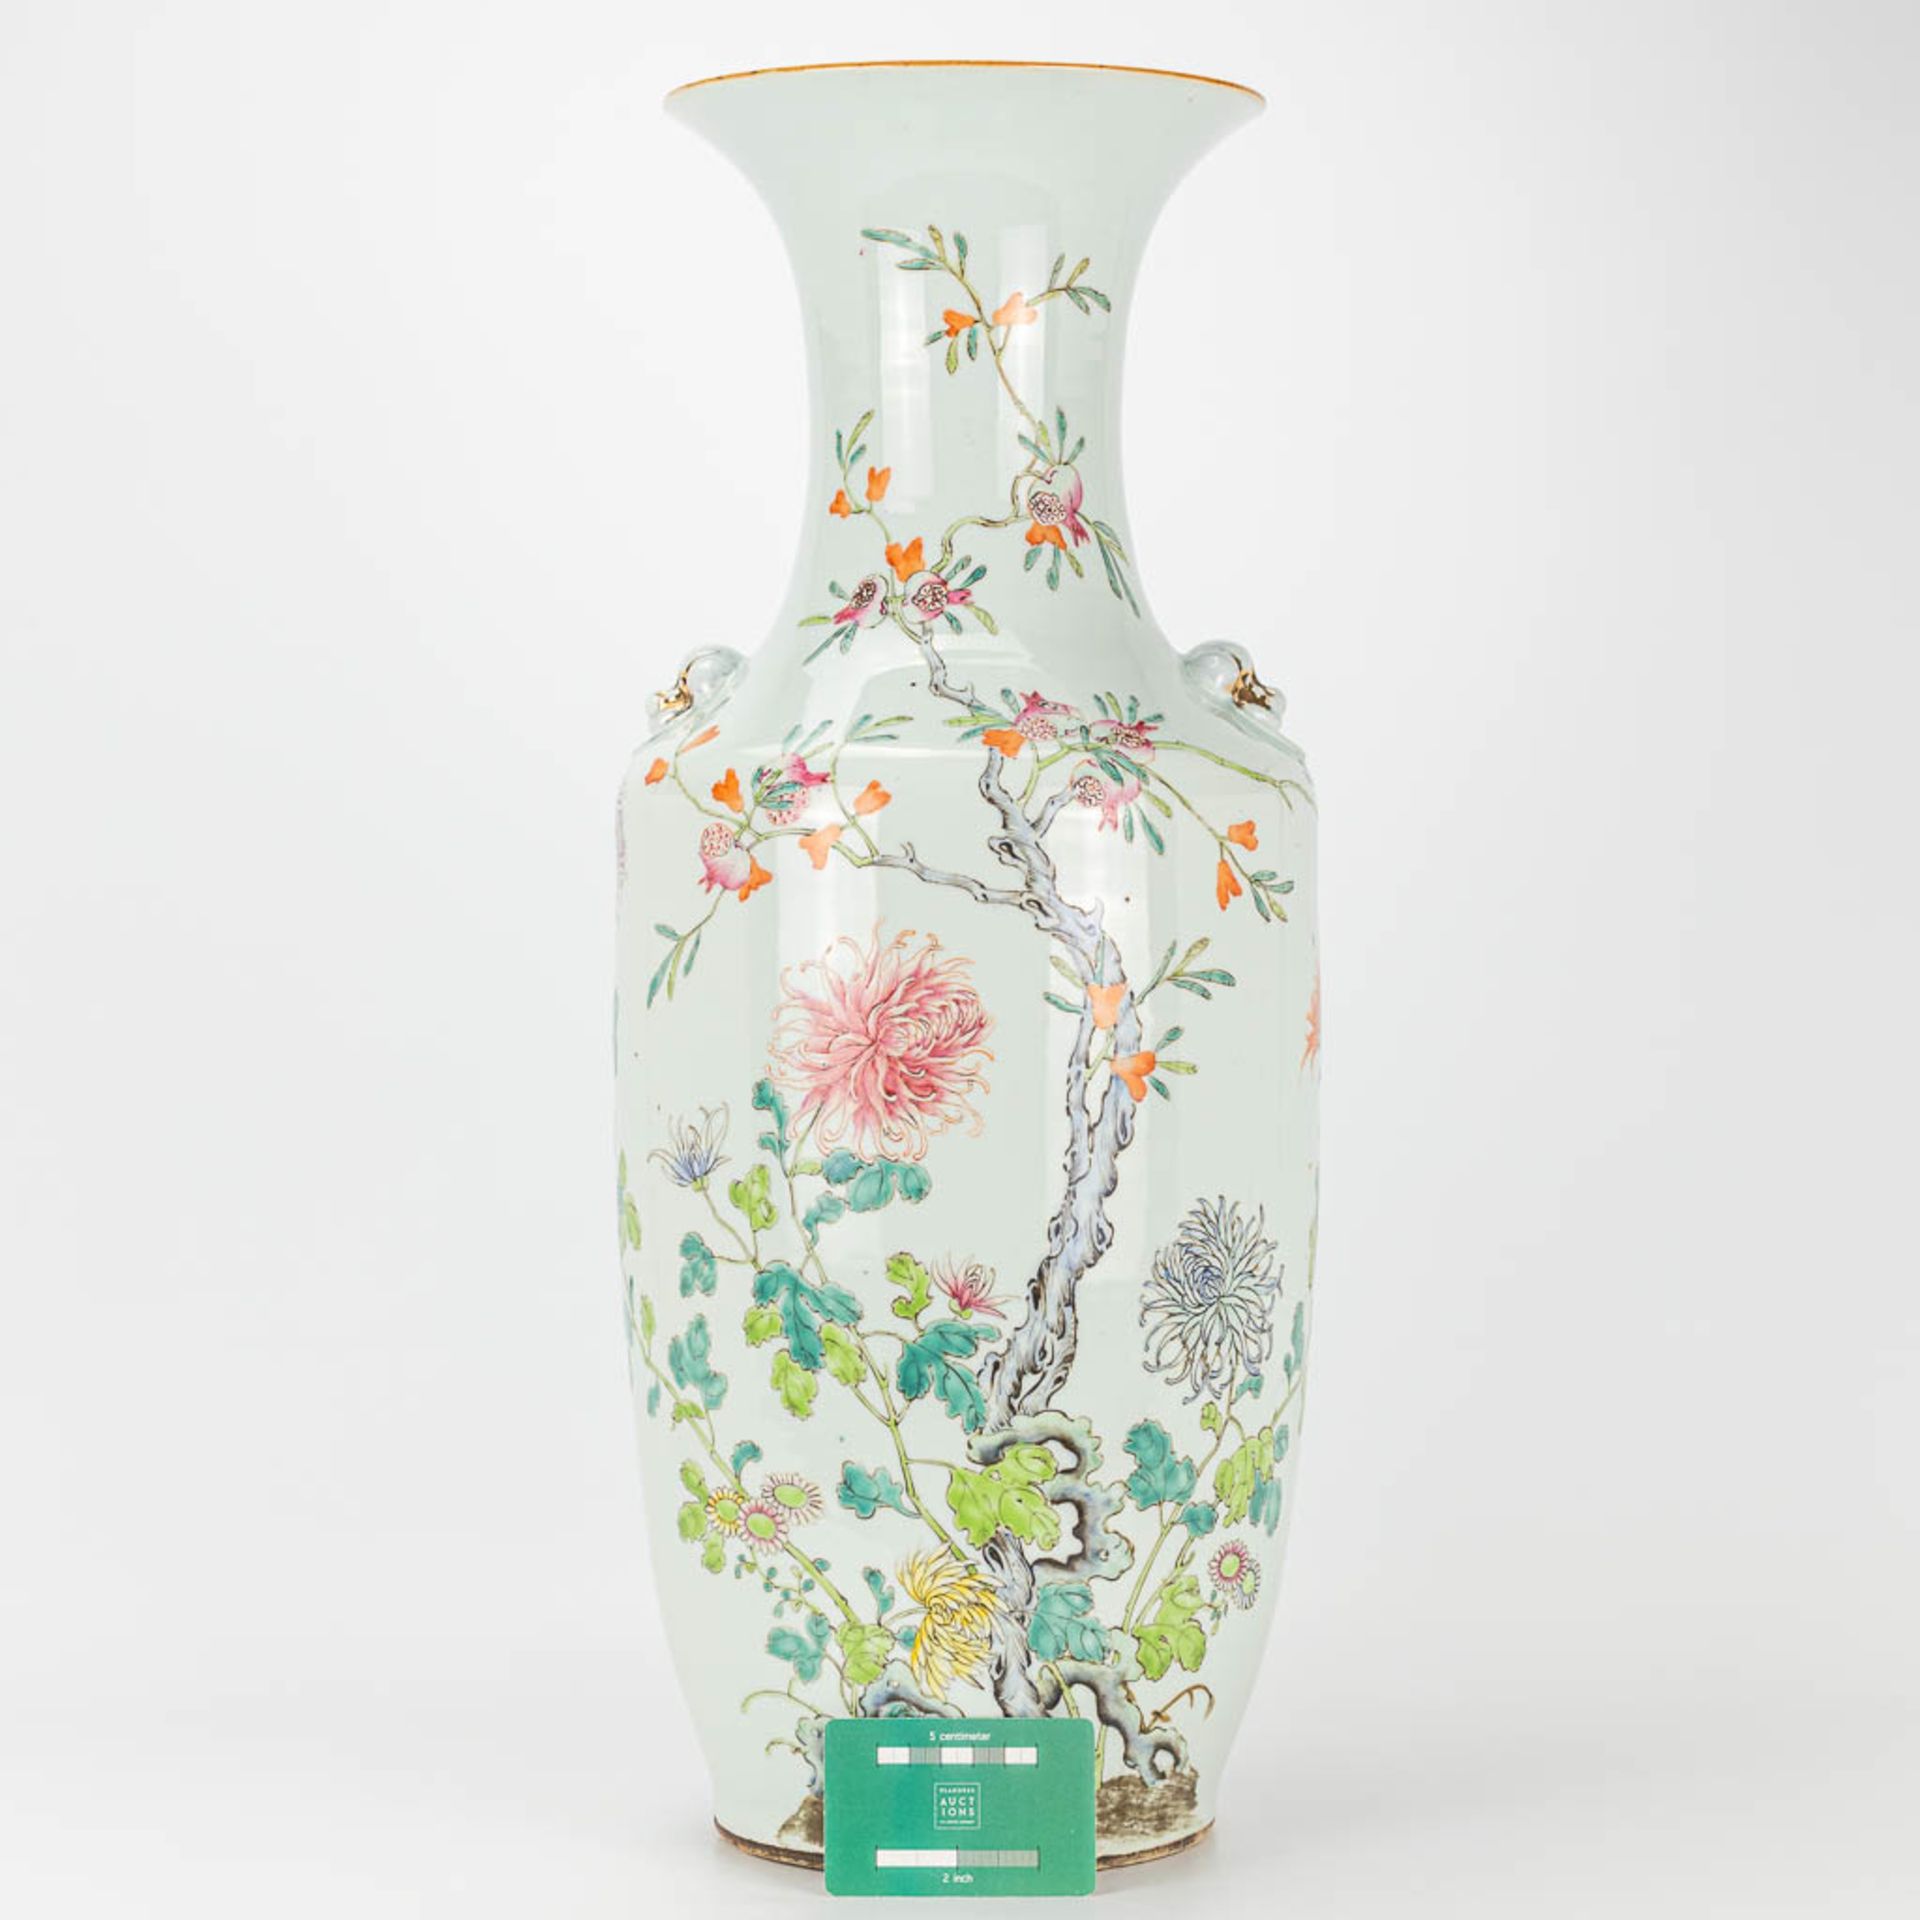 A vase made of Chinese porcelain and decorated with roses and bats. 19th century. - Image 6 of 13